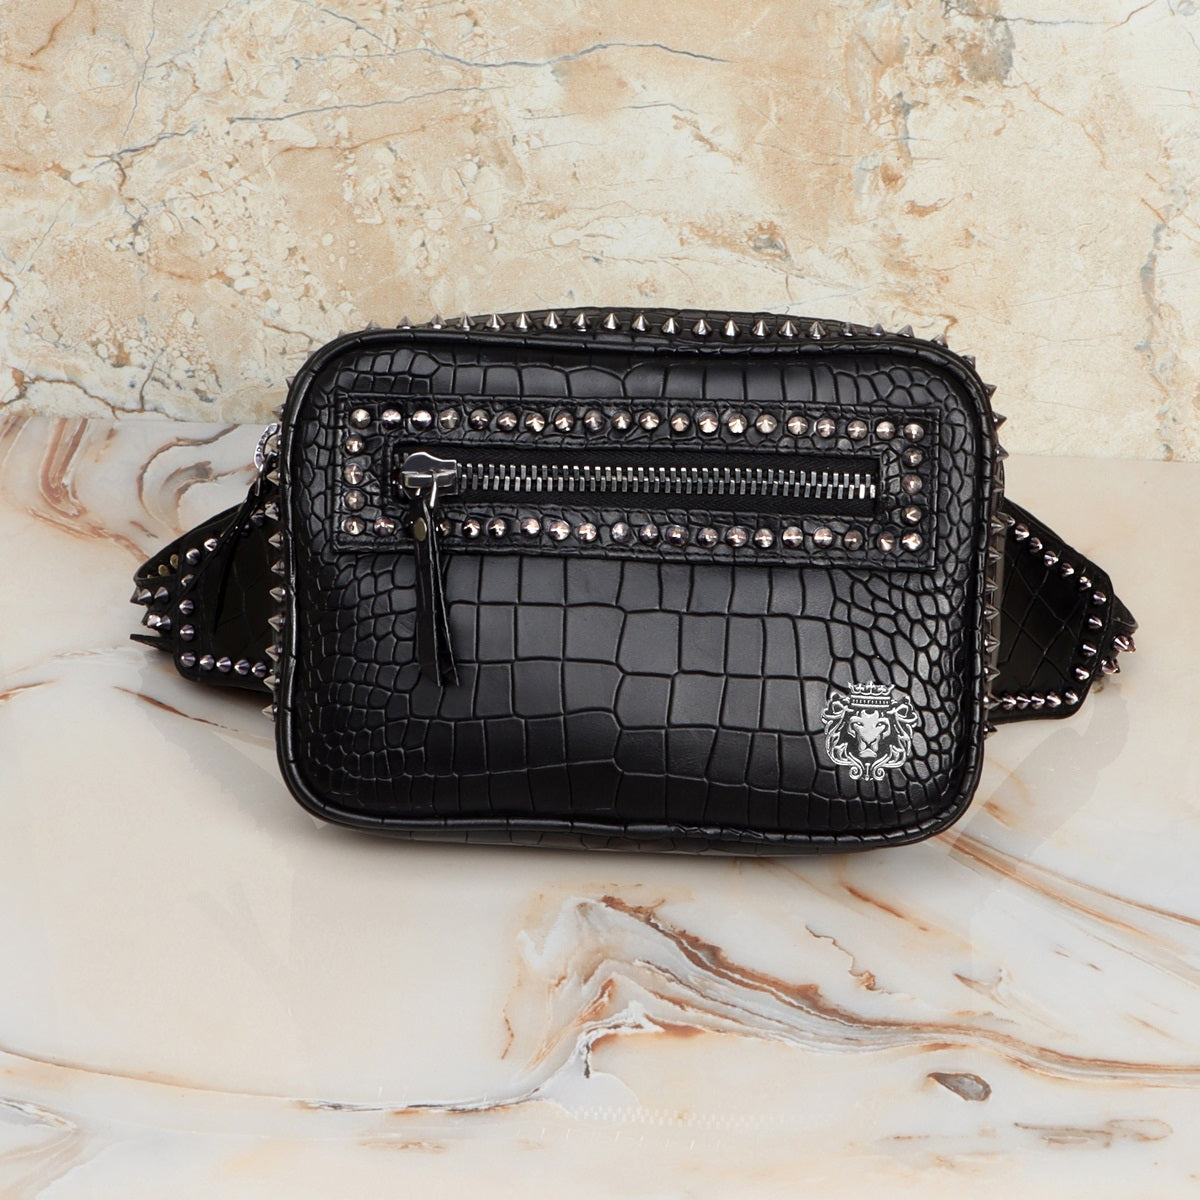 Buy Black Pocket Coin Purse Online - Accessorize India